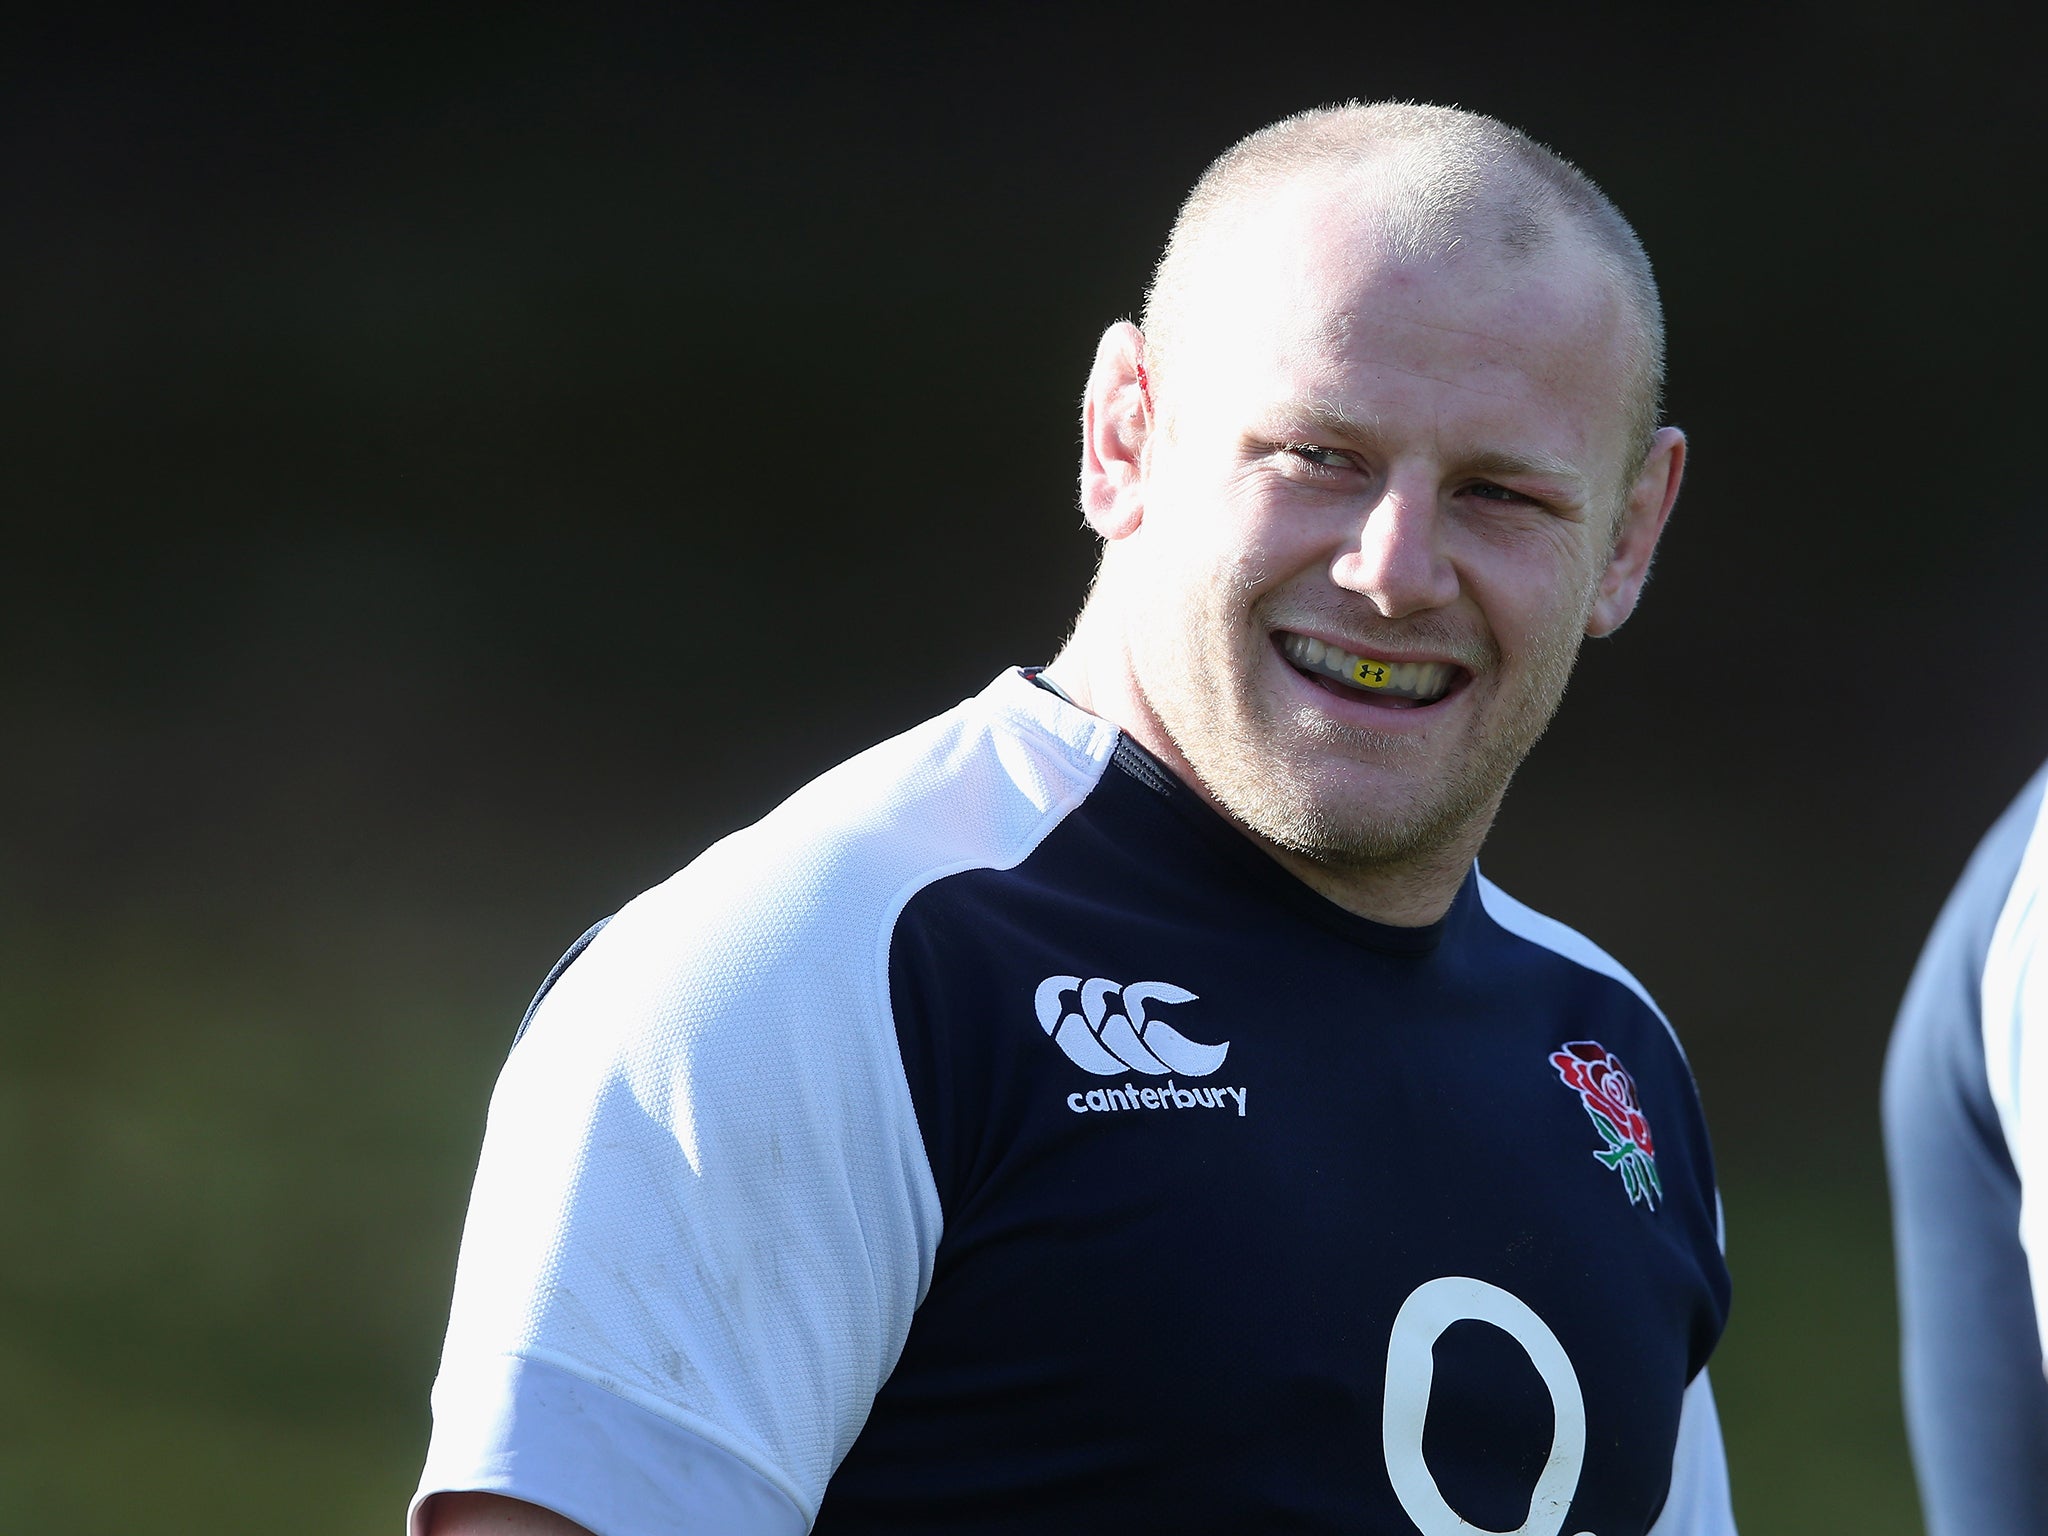 Leicester's Dan Cole has been called up as replacement for the injured David Wilson (Getty)